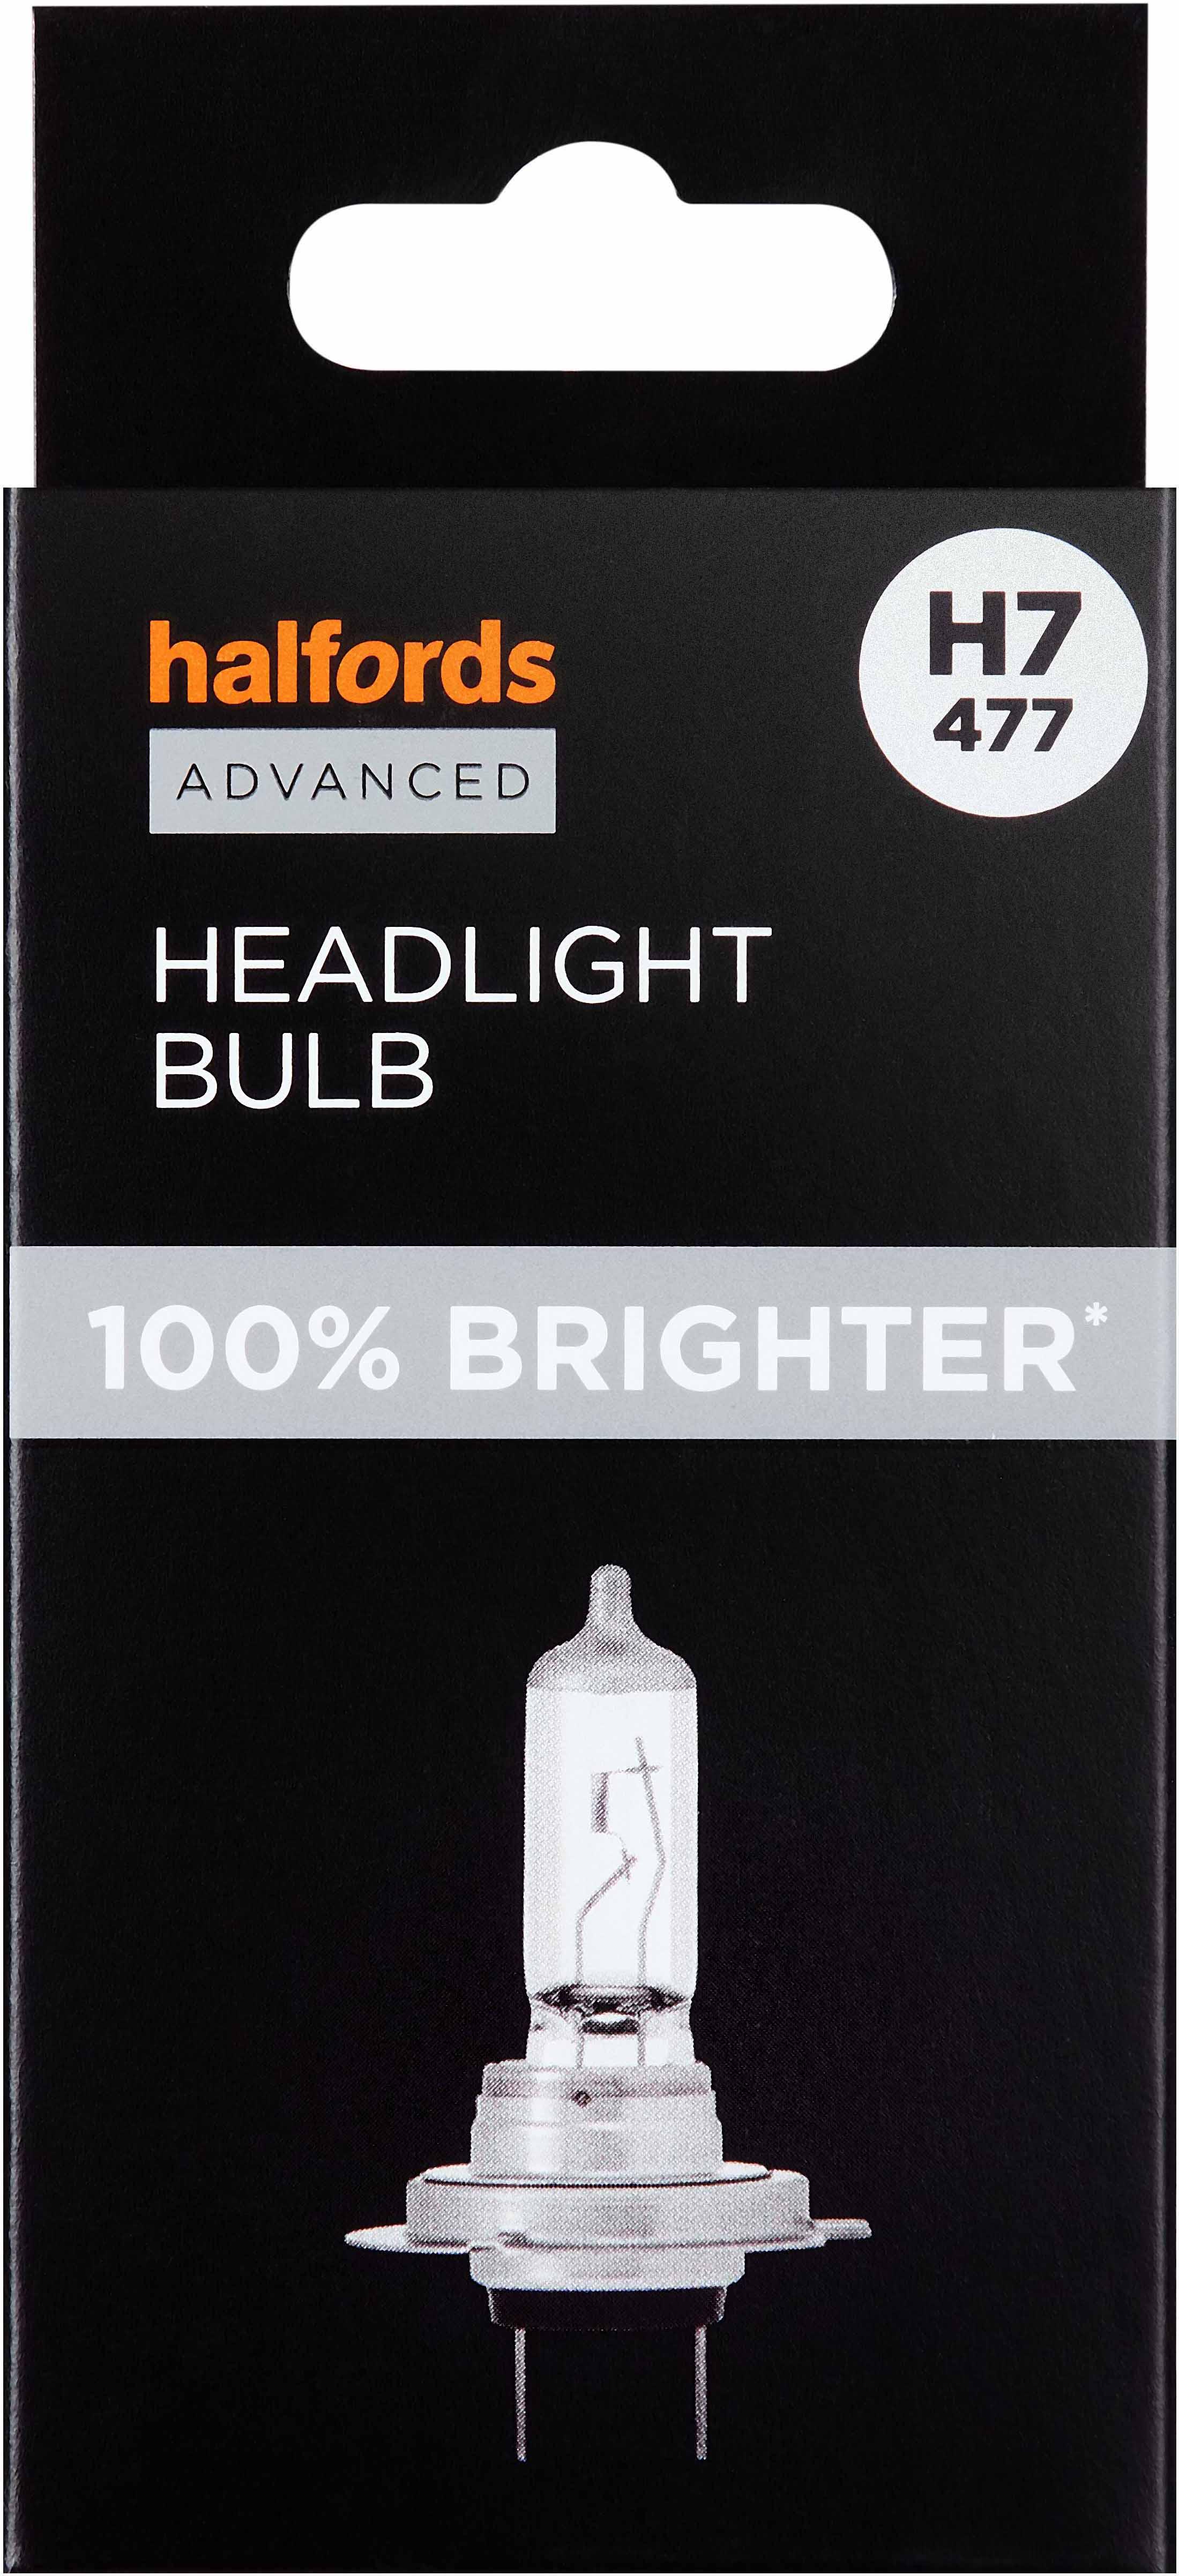 H7 477 Car Headlight Bulb Halfords Advanced Up To +100 Percent Brighter Single Pack